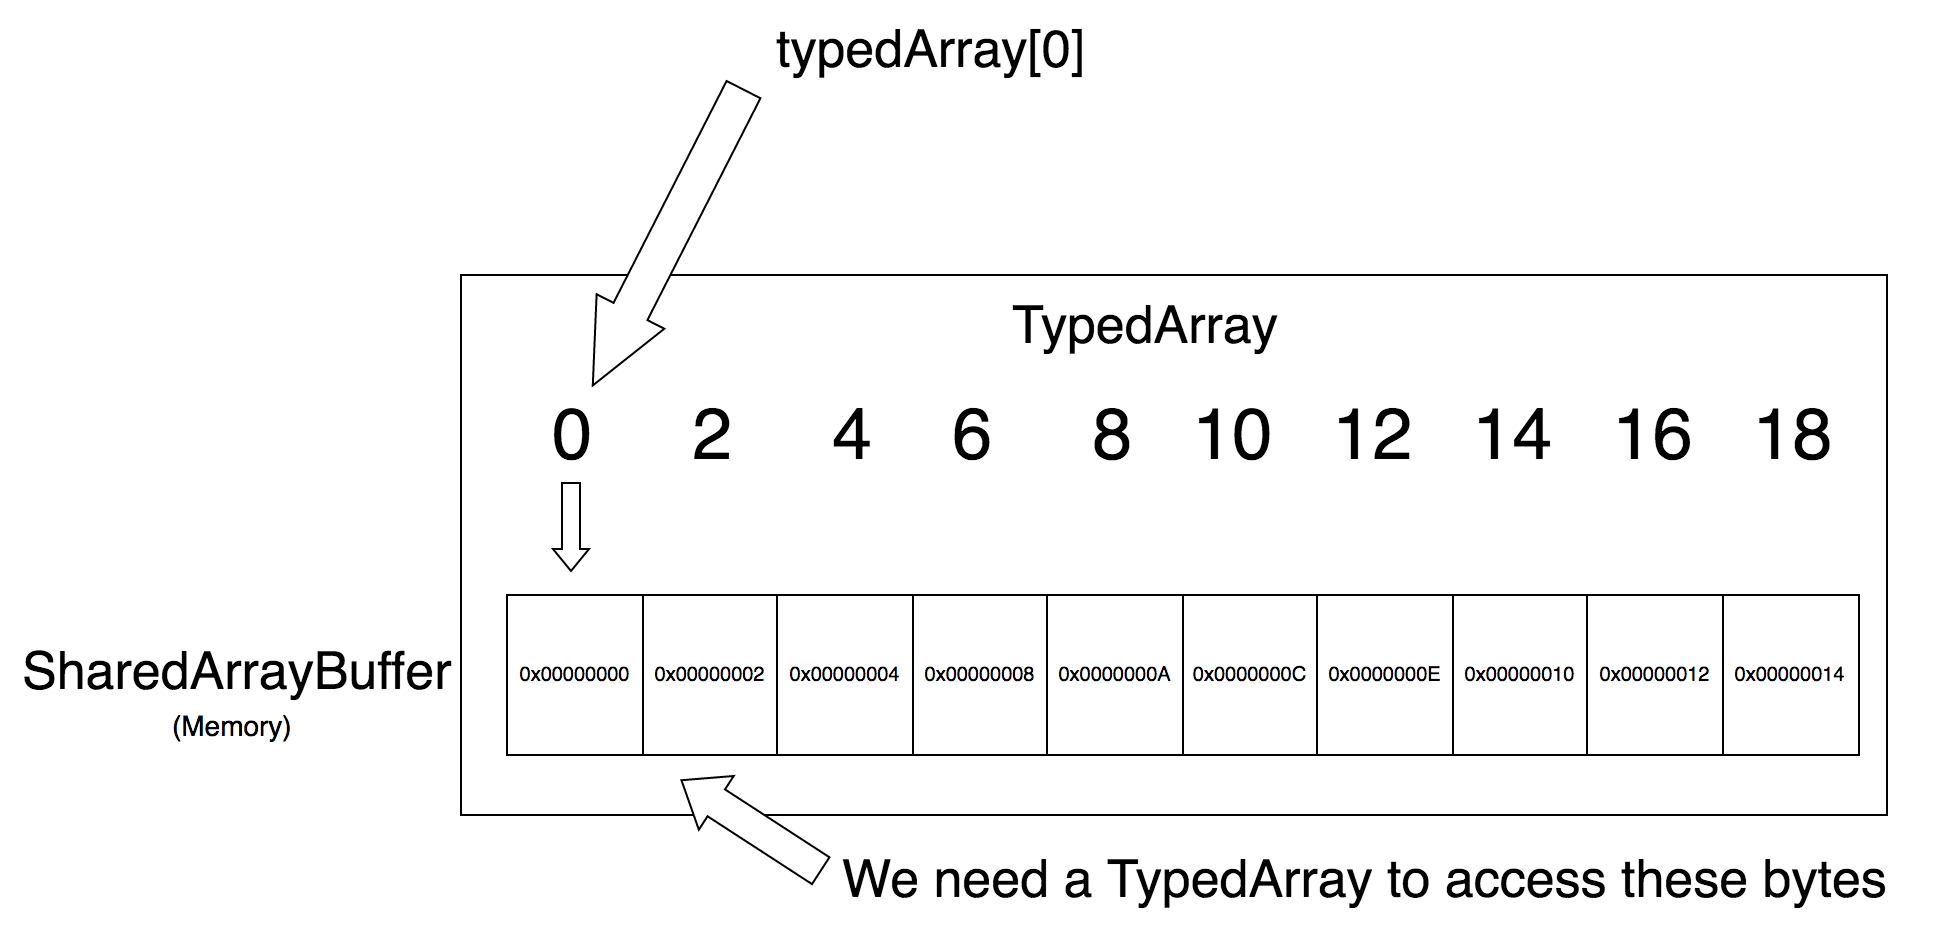 A Typed Array is a view on top of a shared memory area